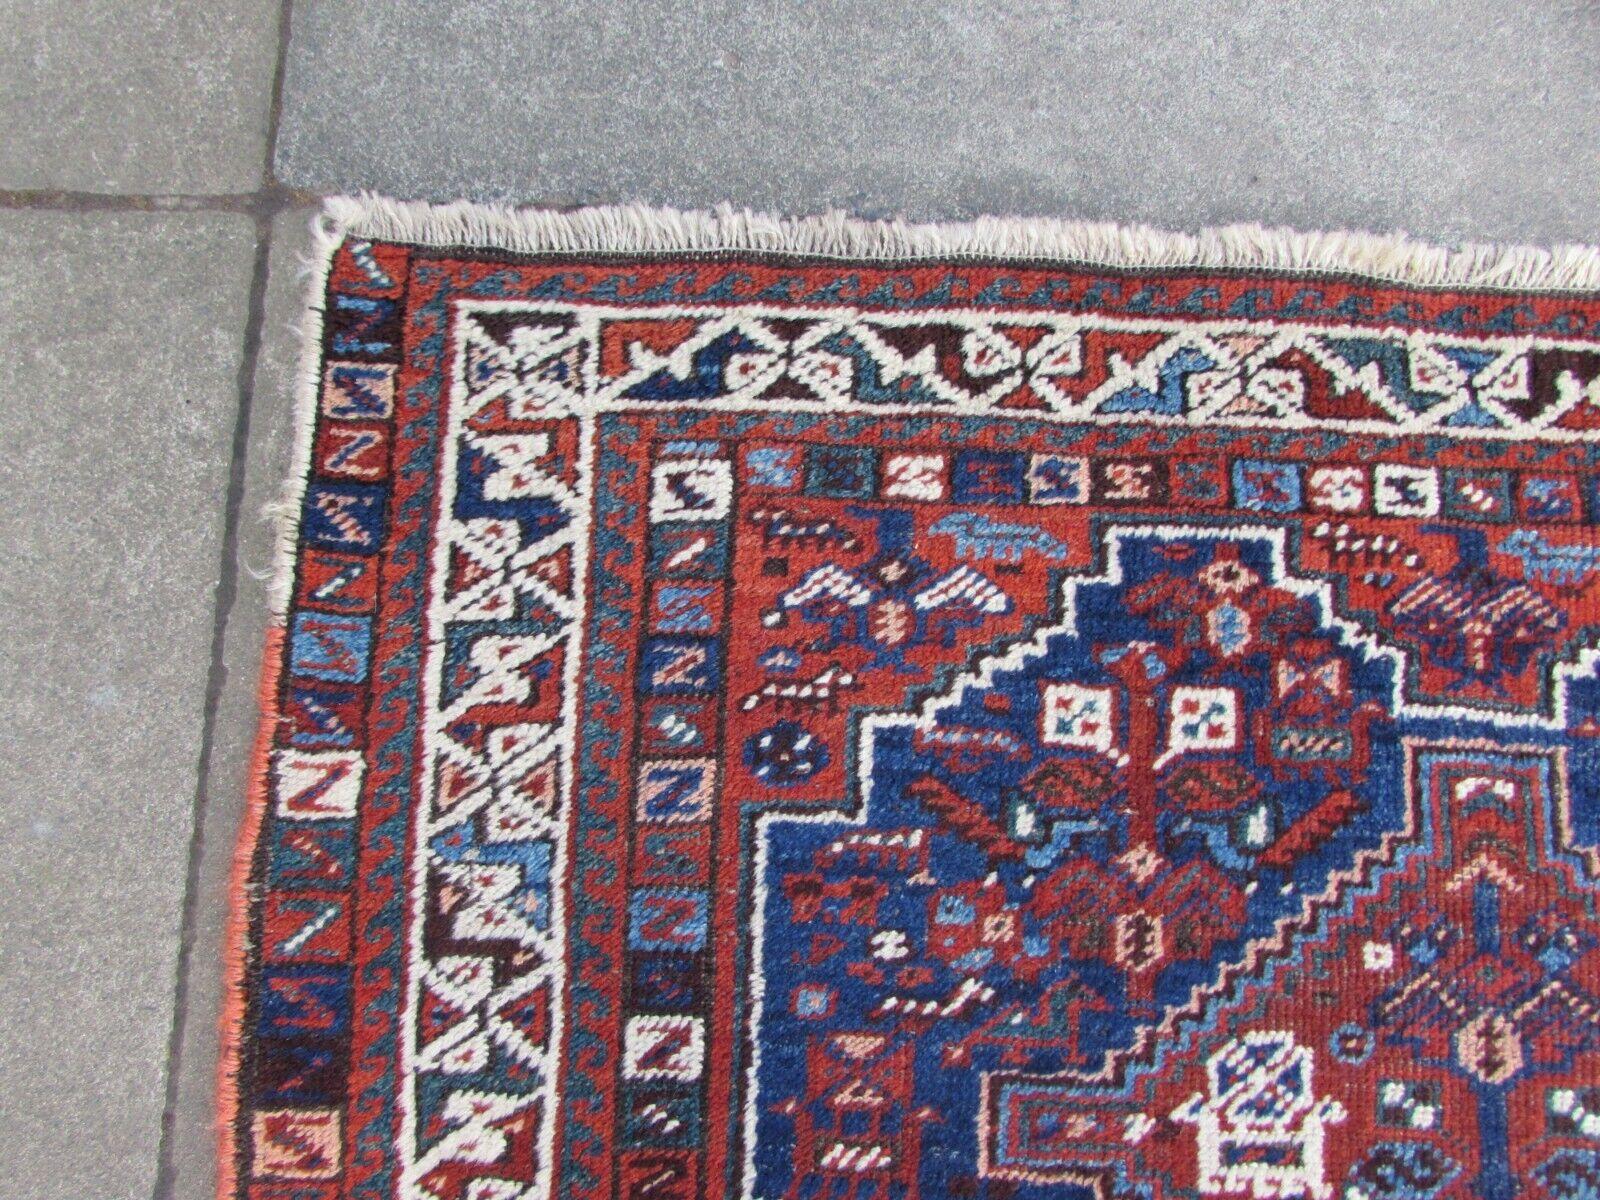 Handmade Antique Persian Style Shiraz Rug 3.9' x 4.9', 1920s, 1Q62 For Sale 1